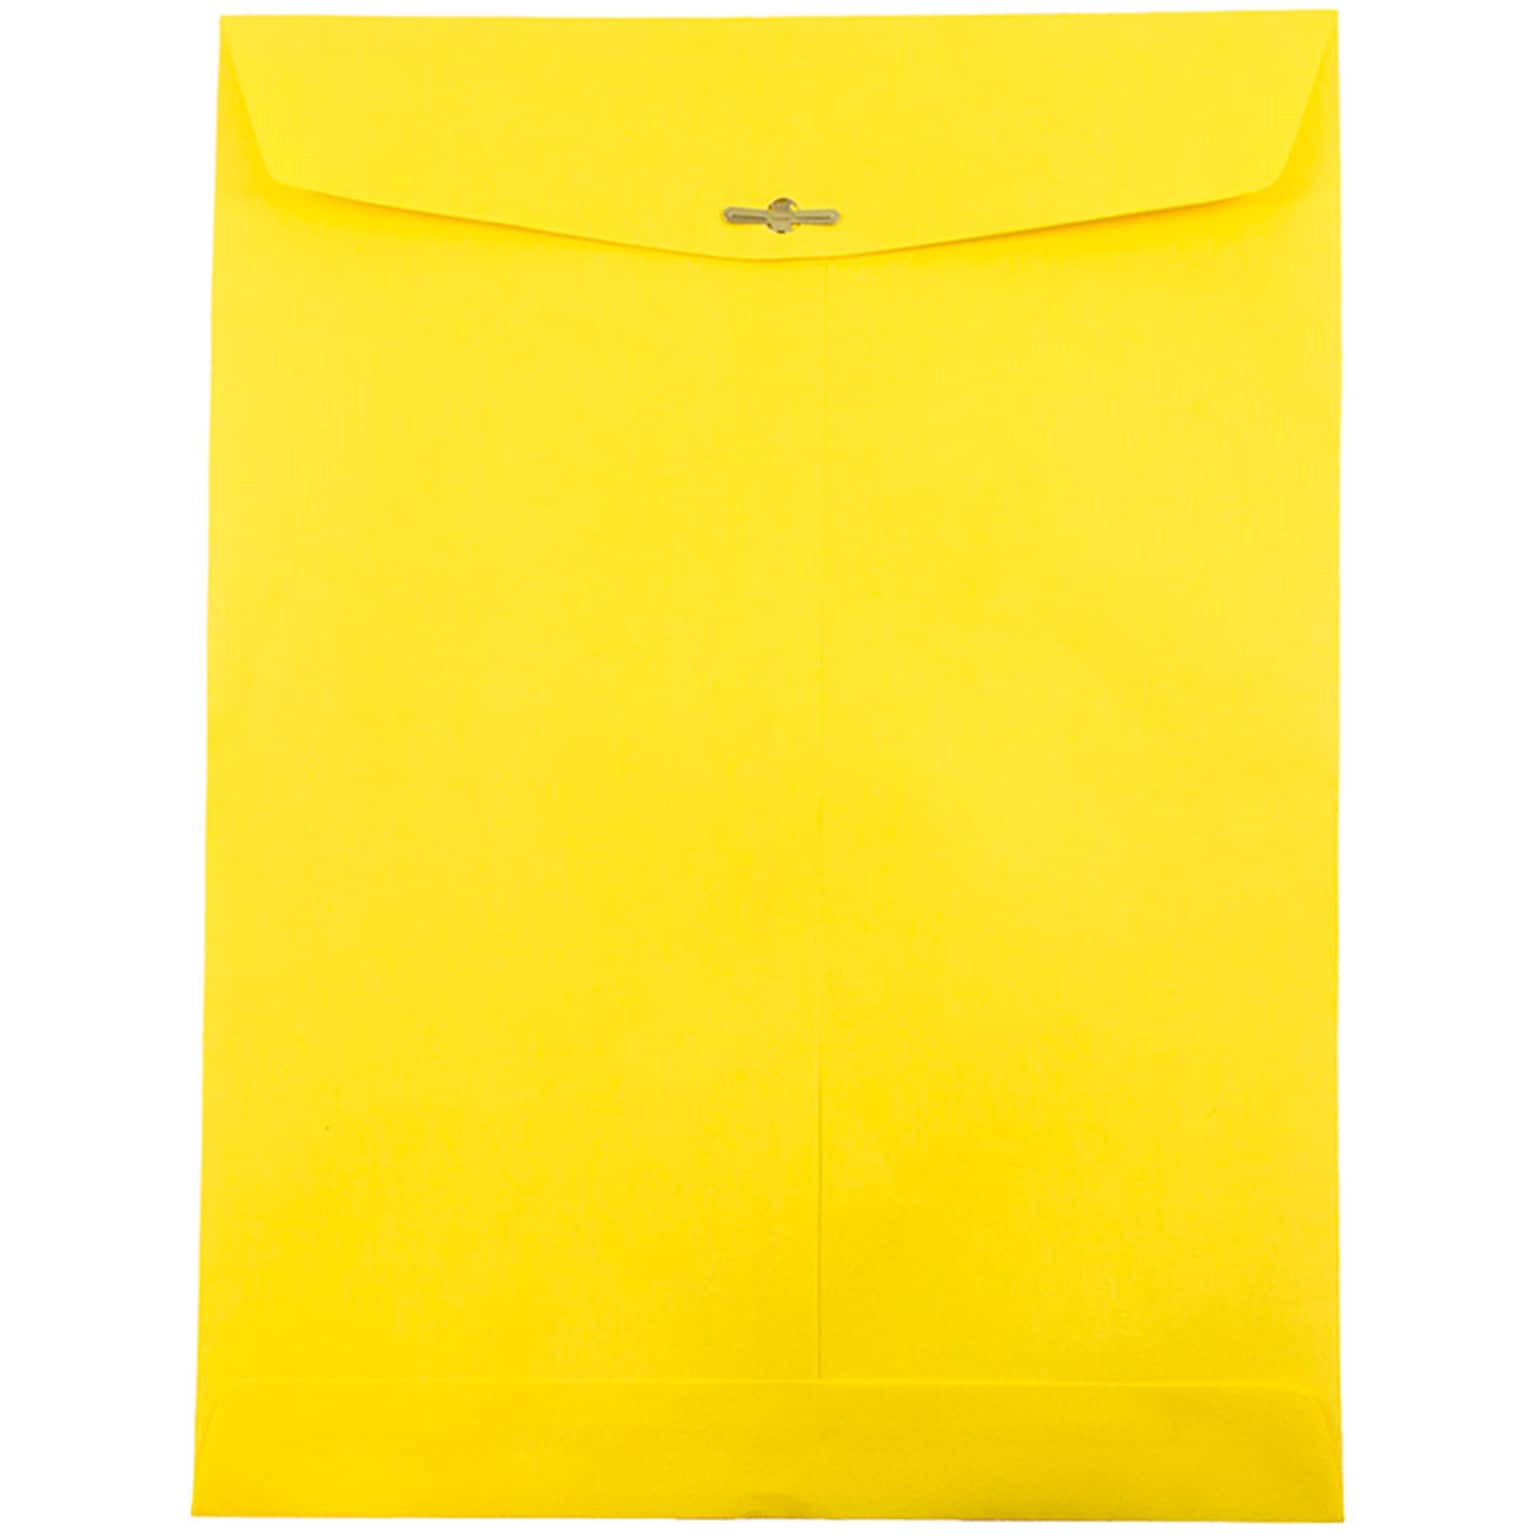 JAM Paper 10 x 13 Open End Catalog Colored Envelopes with Clasp Closure, Yellow Recycled, 50/Pack (900906710i)